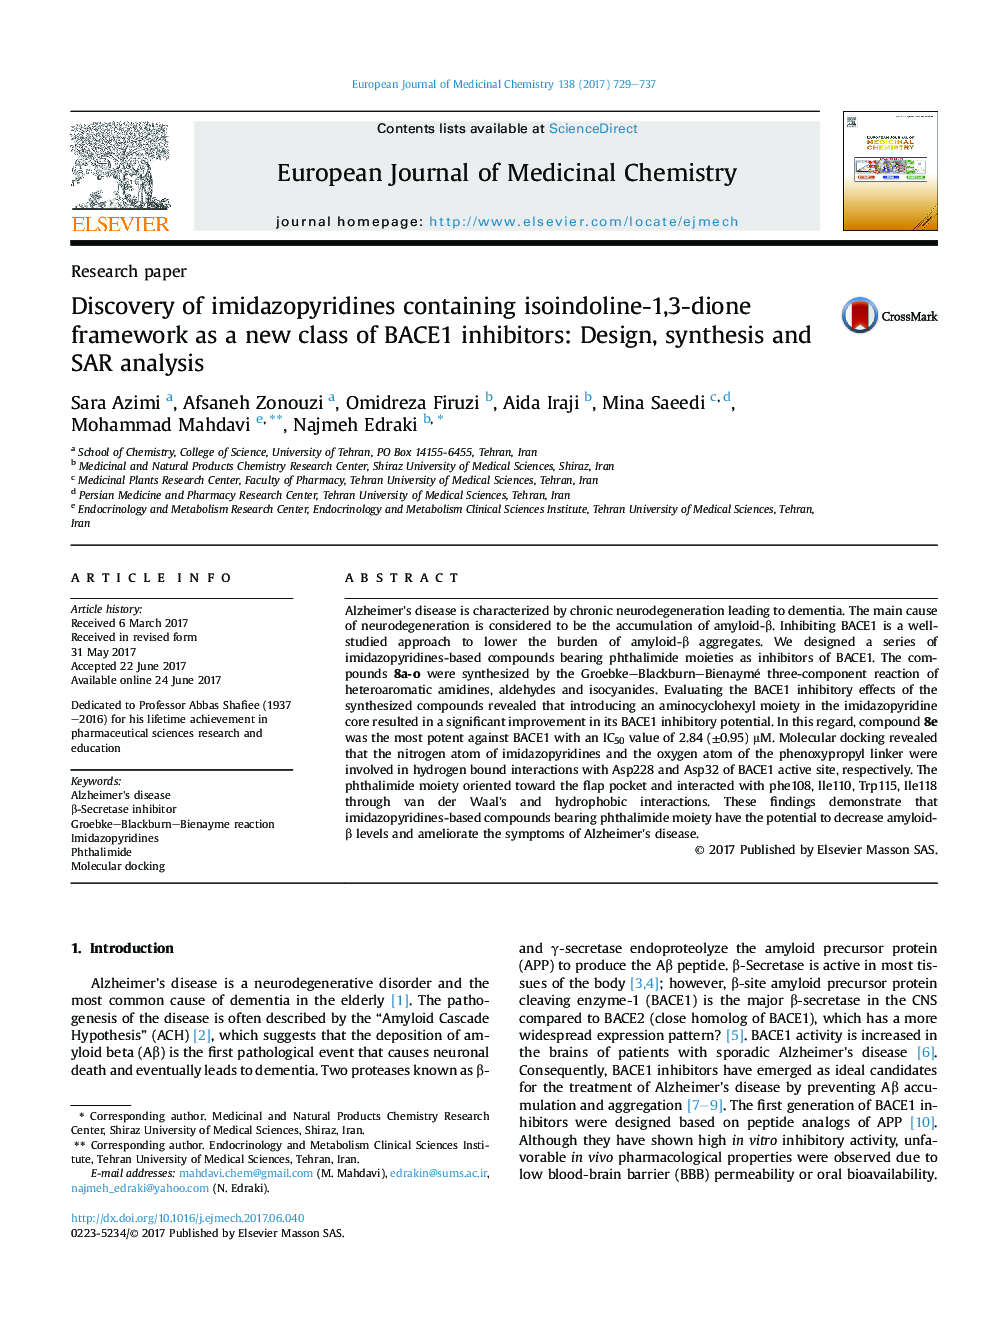 Discovery of imidazopyridines containing isoindoline-1,3-dione framework as a new class of BACE1 inhibitors: Design, synthesis and SAR analysis